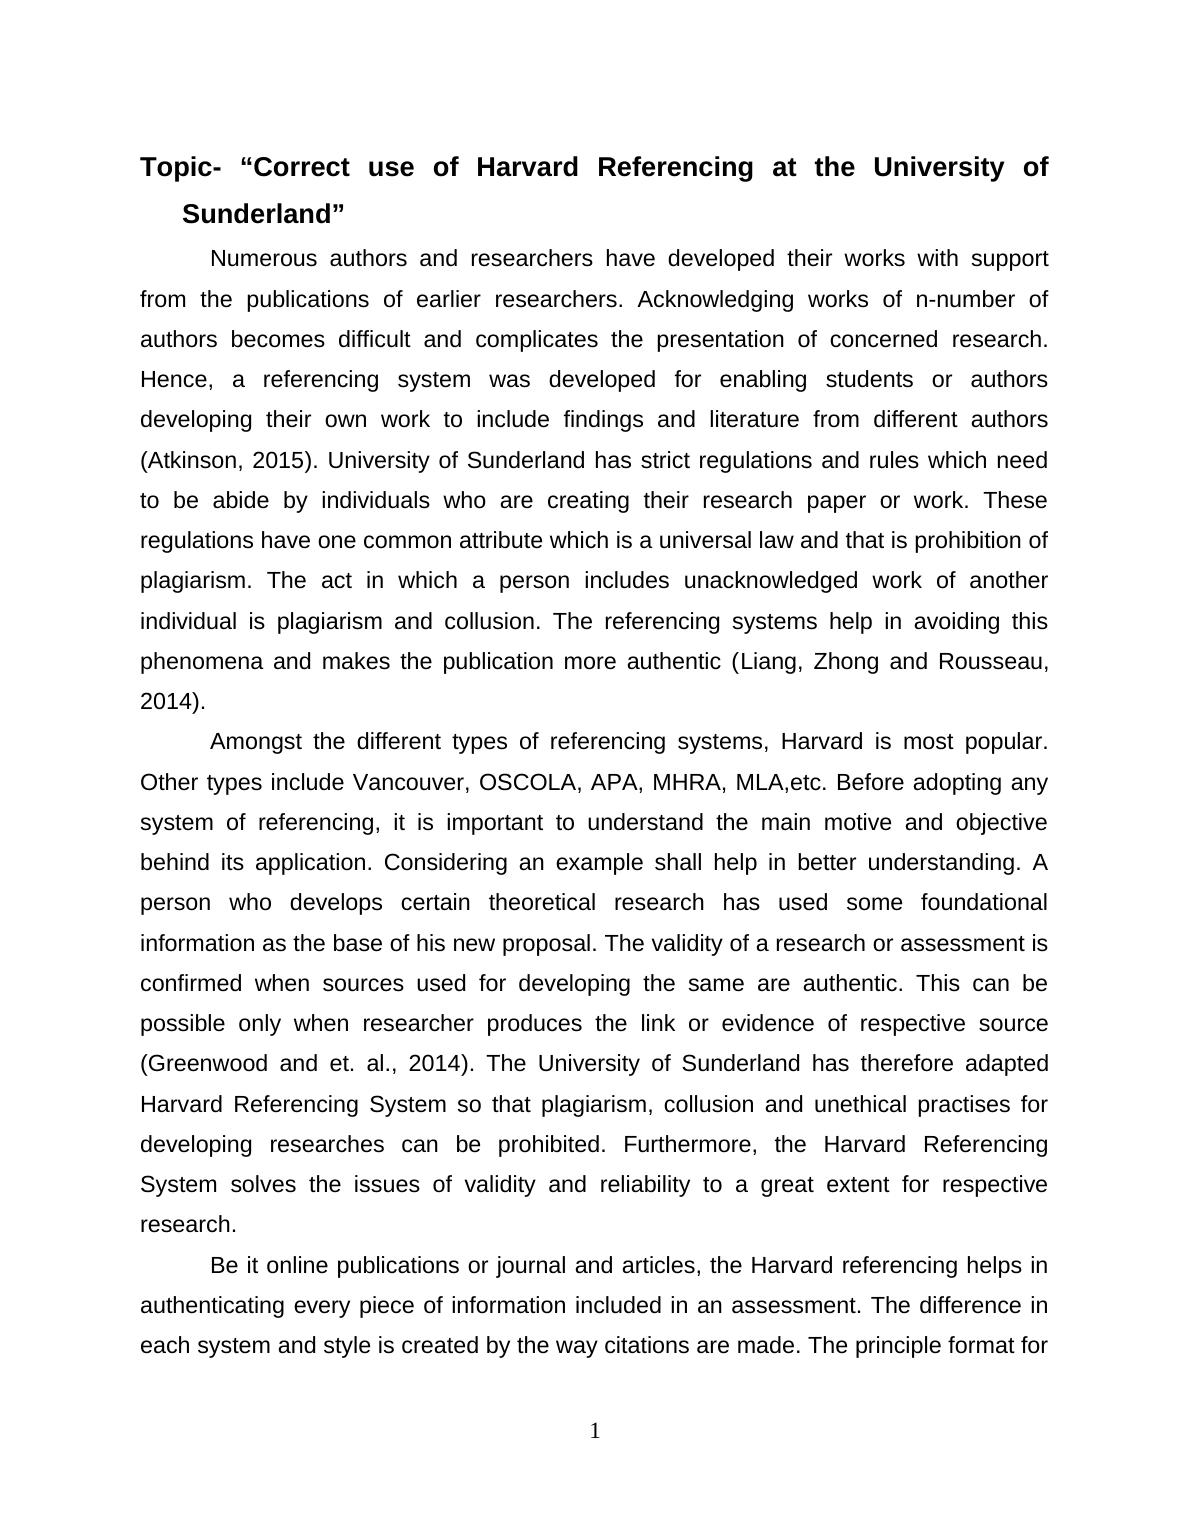 Research Paper on Correct use of Harvard Referencing at the University of Sunderland_3